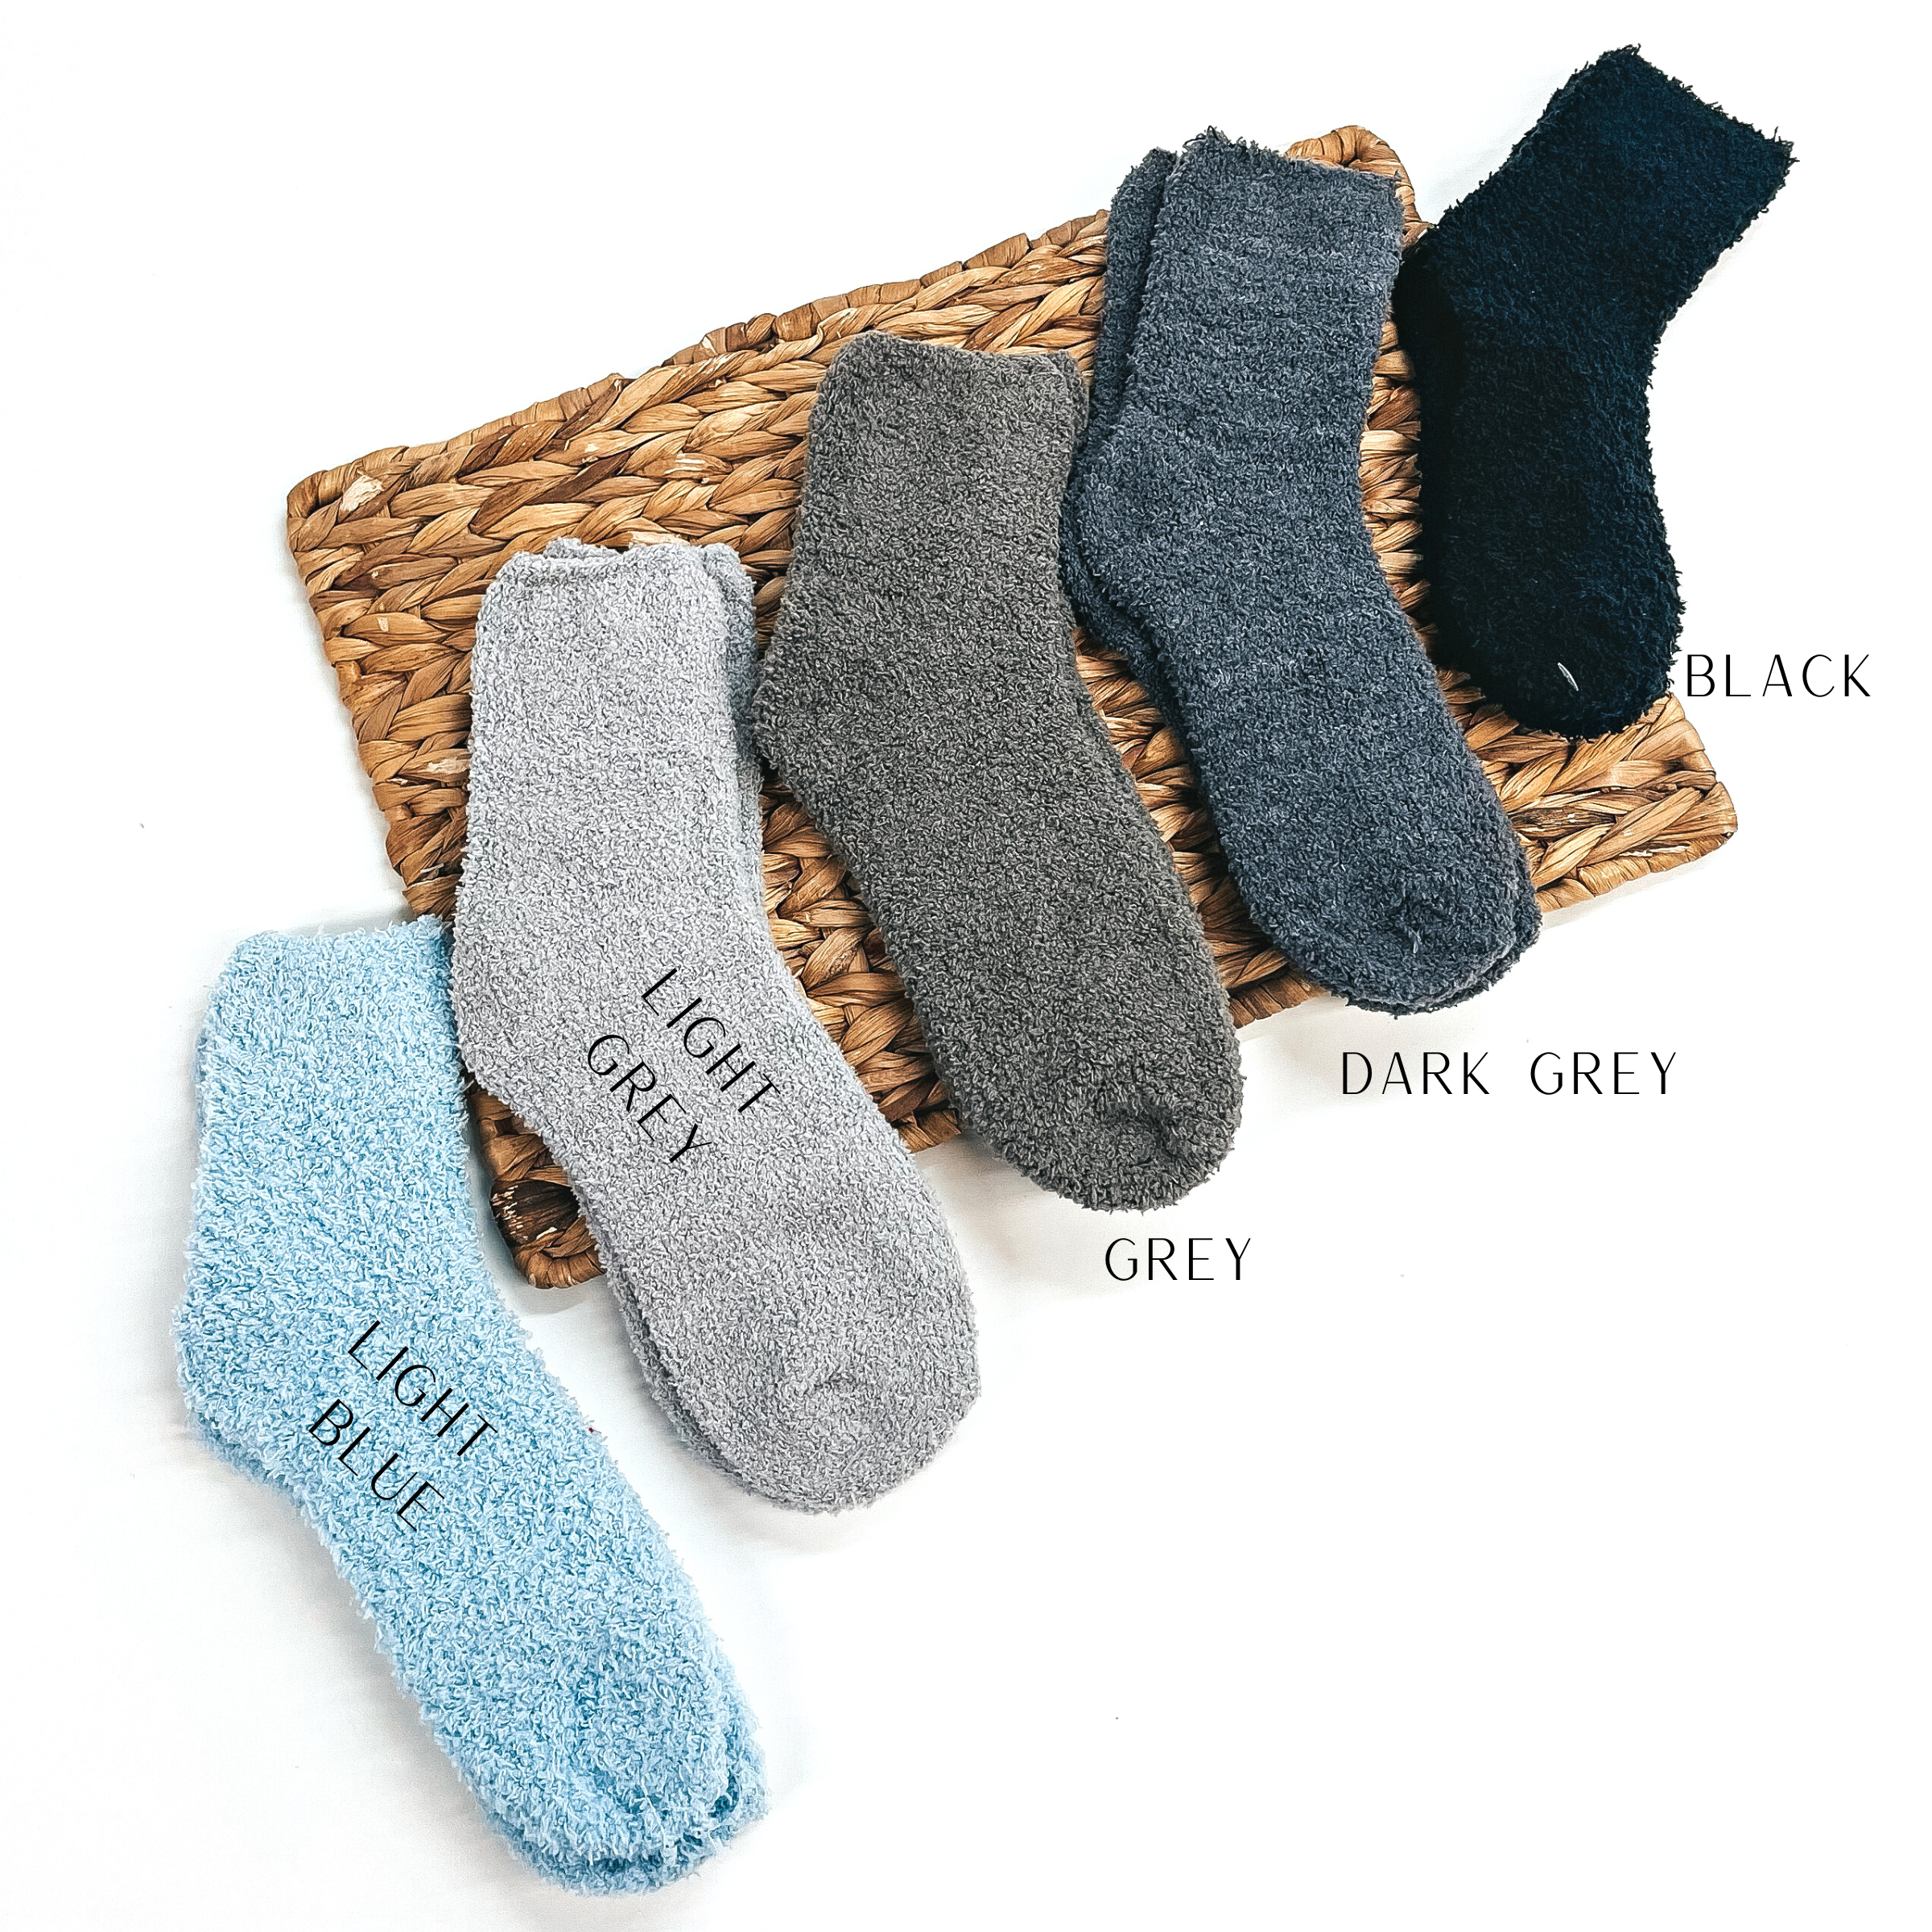 These are five pairs of fuzzy socks, from left to right; light blue, light grey, grey,  dark grey, and black. These socks are taken on a brown woven slate and on a white  background.